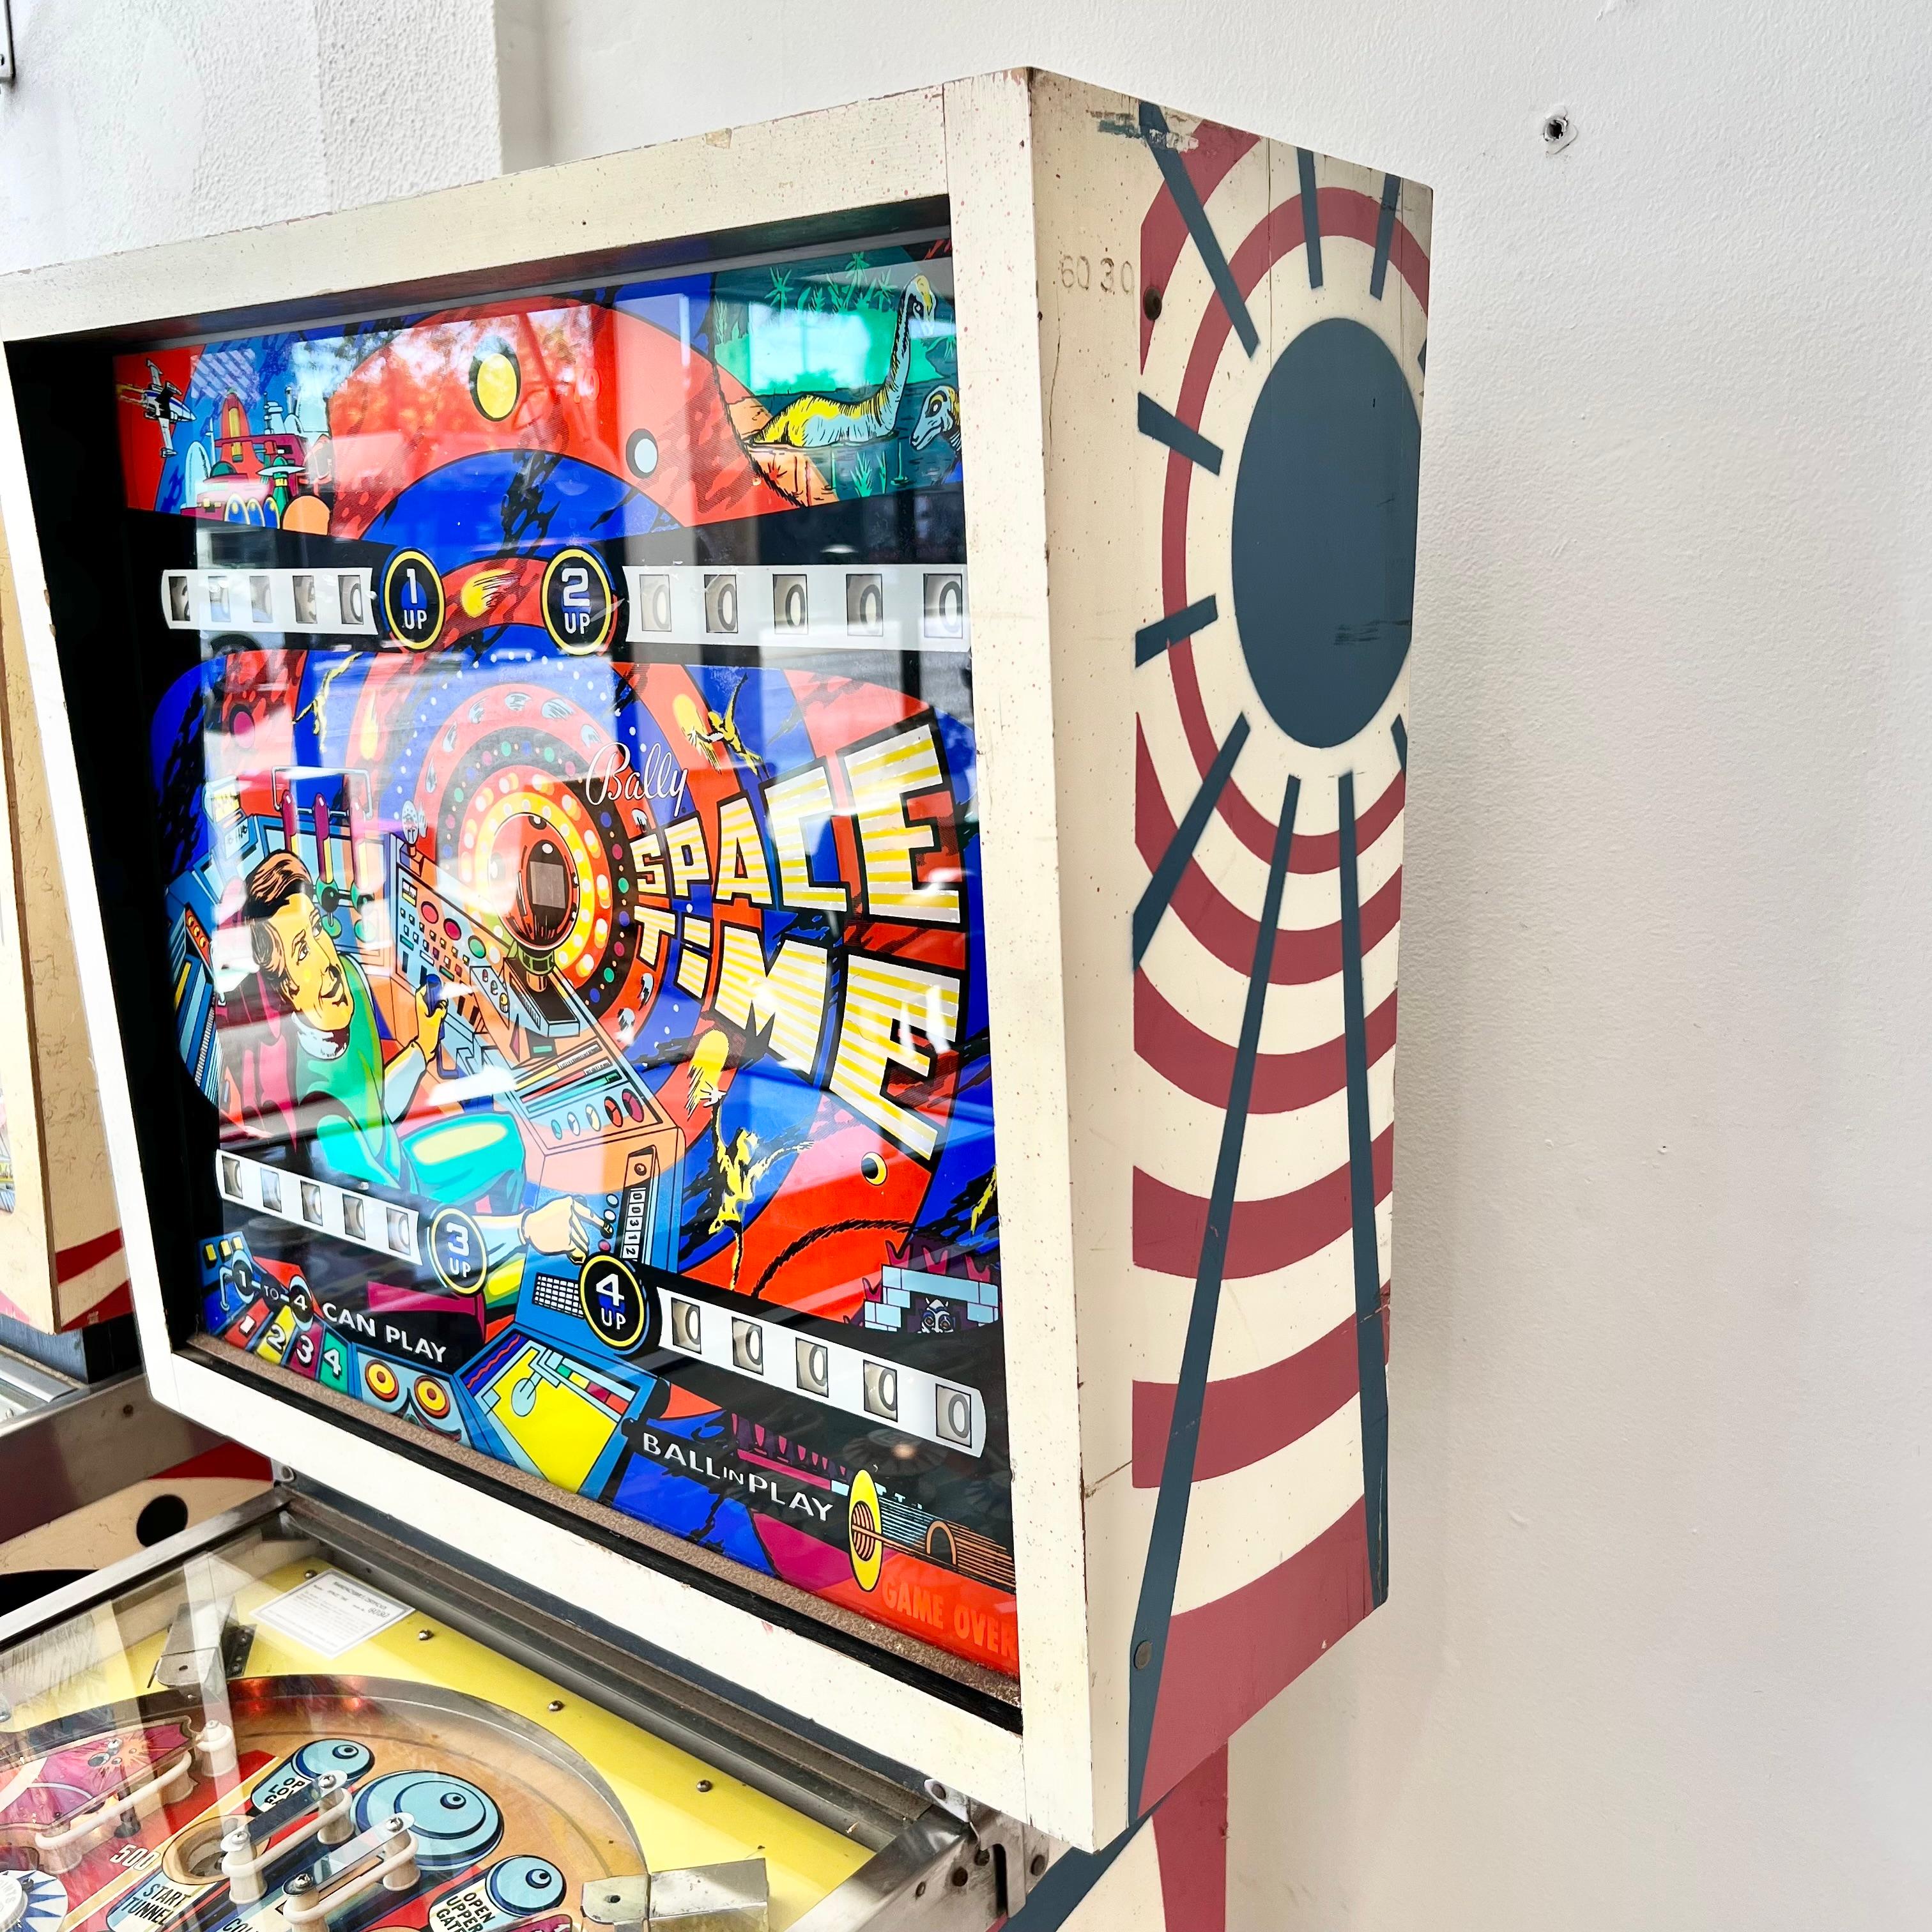 Vintage 'SPACE TIME' pinball machine from 1972. Made by Bally Manufacturing Corporation and designed by Jim Patla. In excellent working condition. Great visuals and sounds. Extremely fast paced game speed and very fun to play. This game features